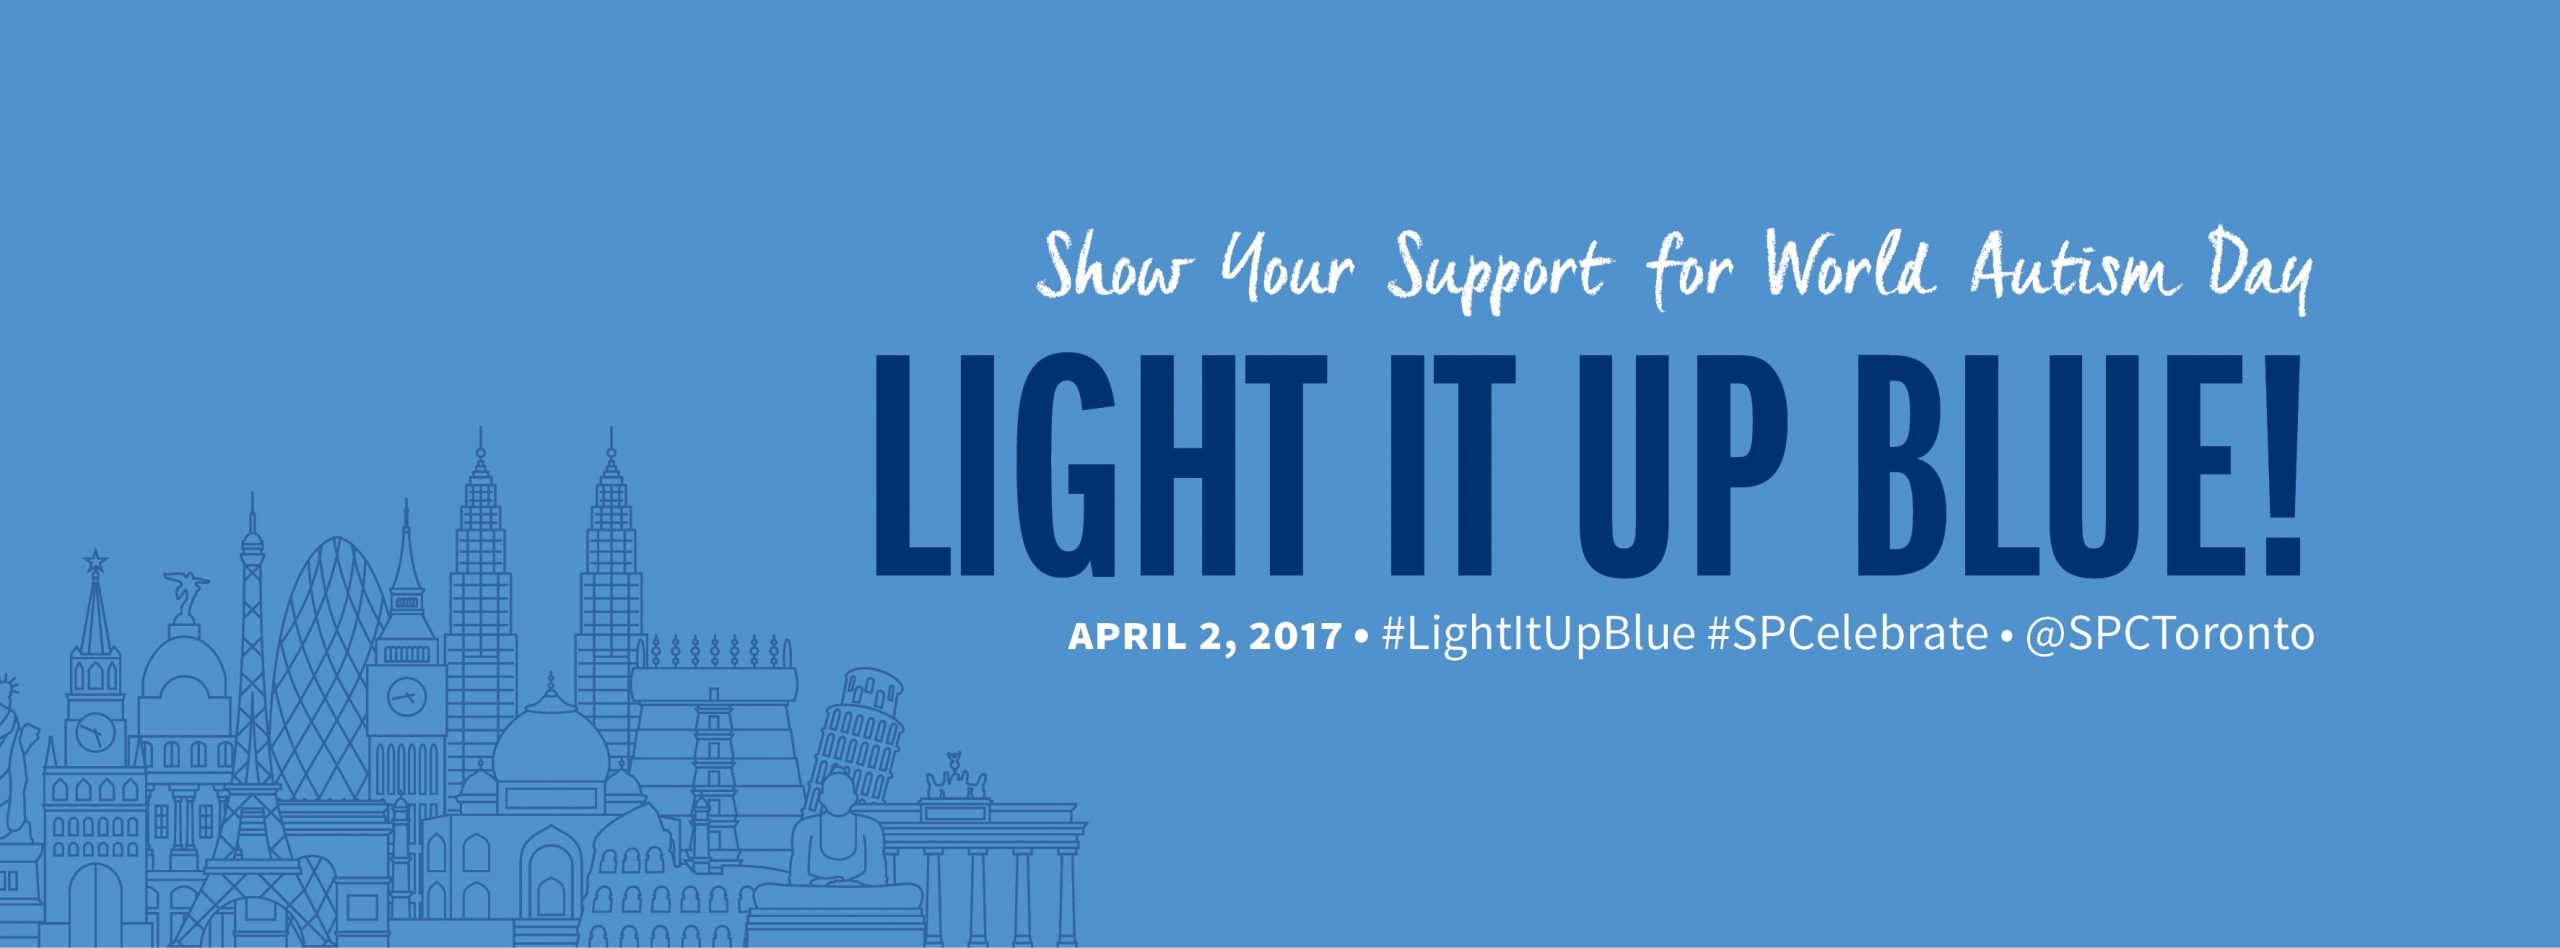 Light It Up Blue  Show Your Support and Help Raise ...